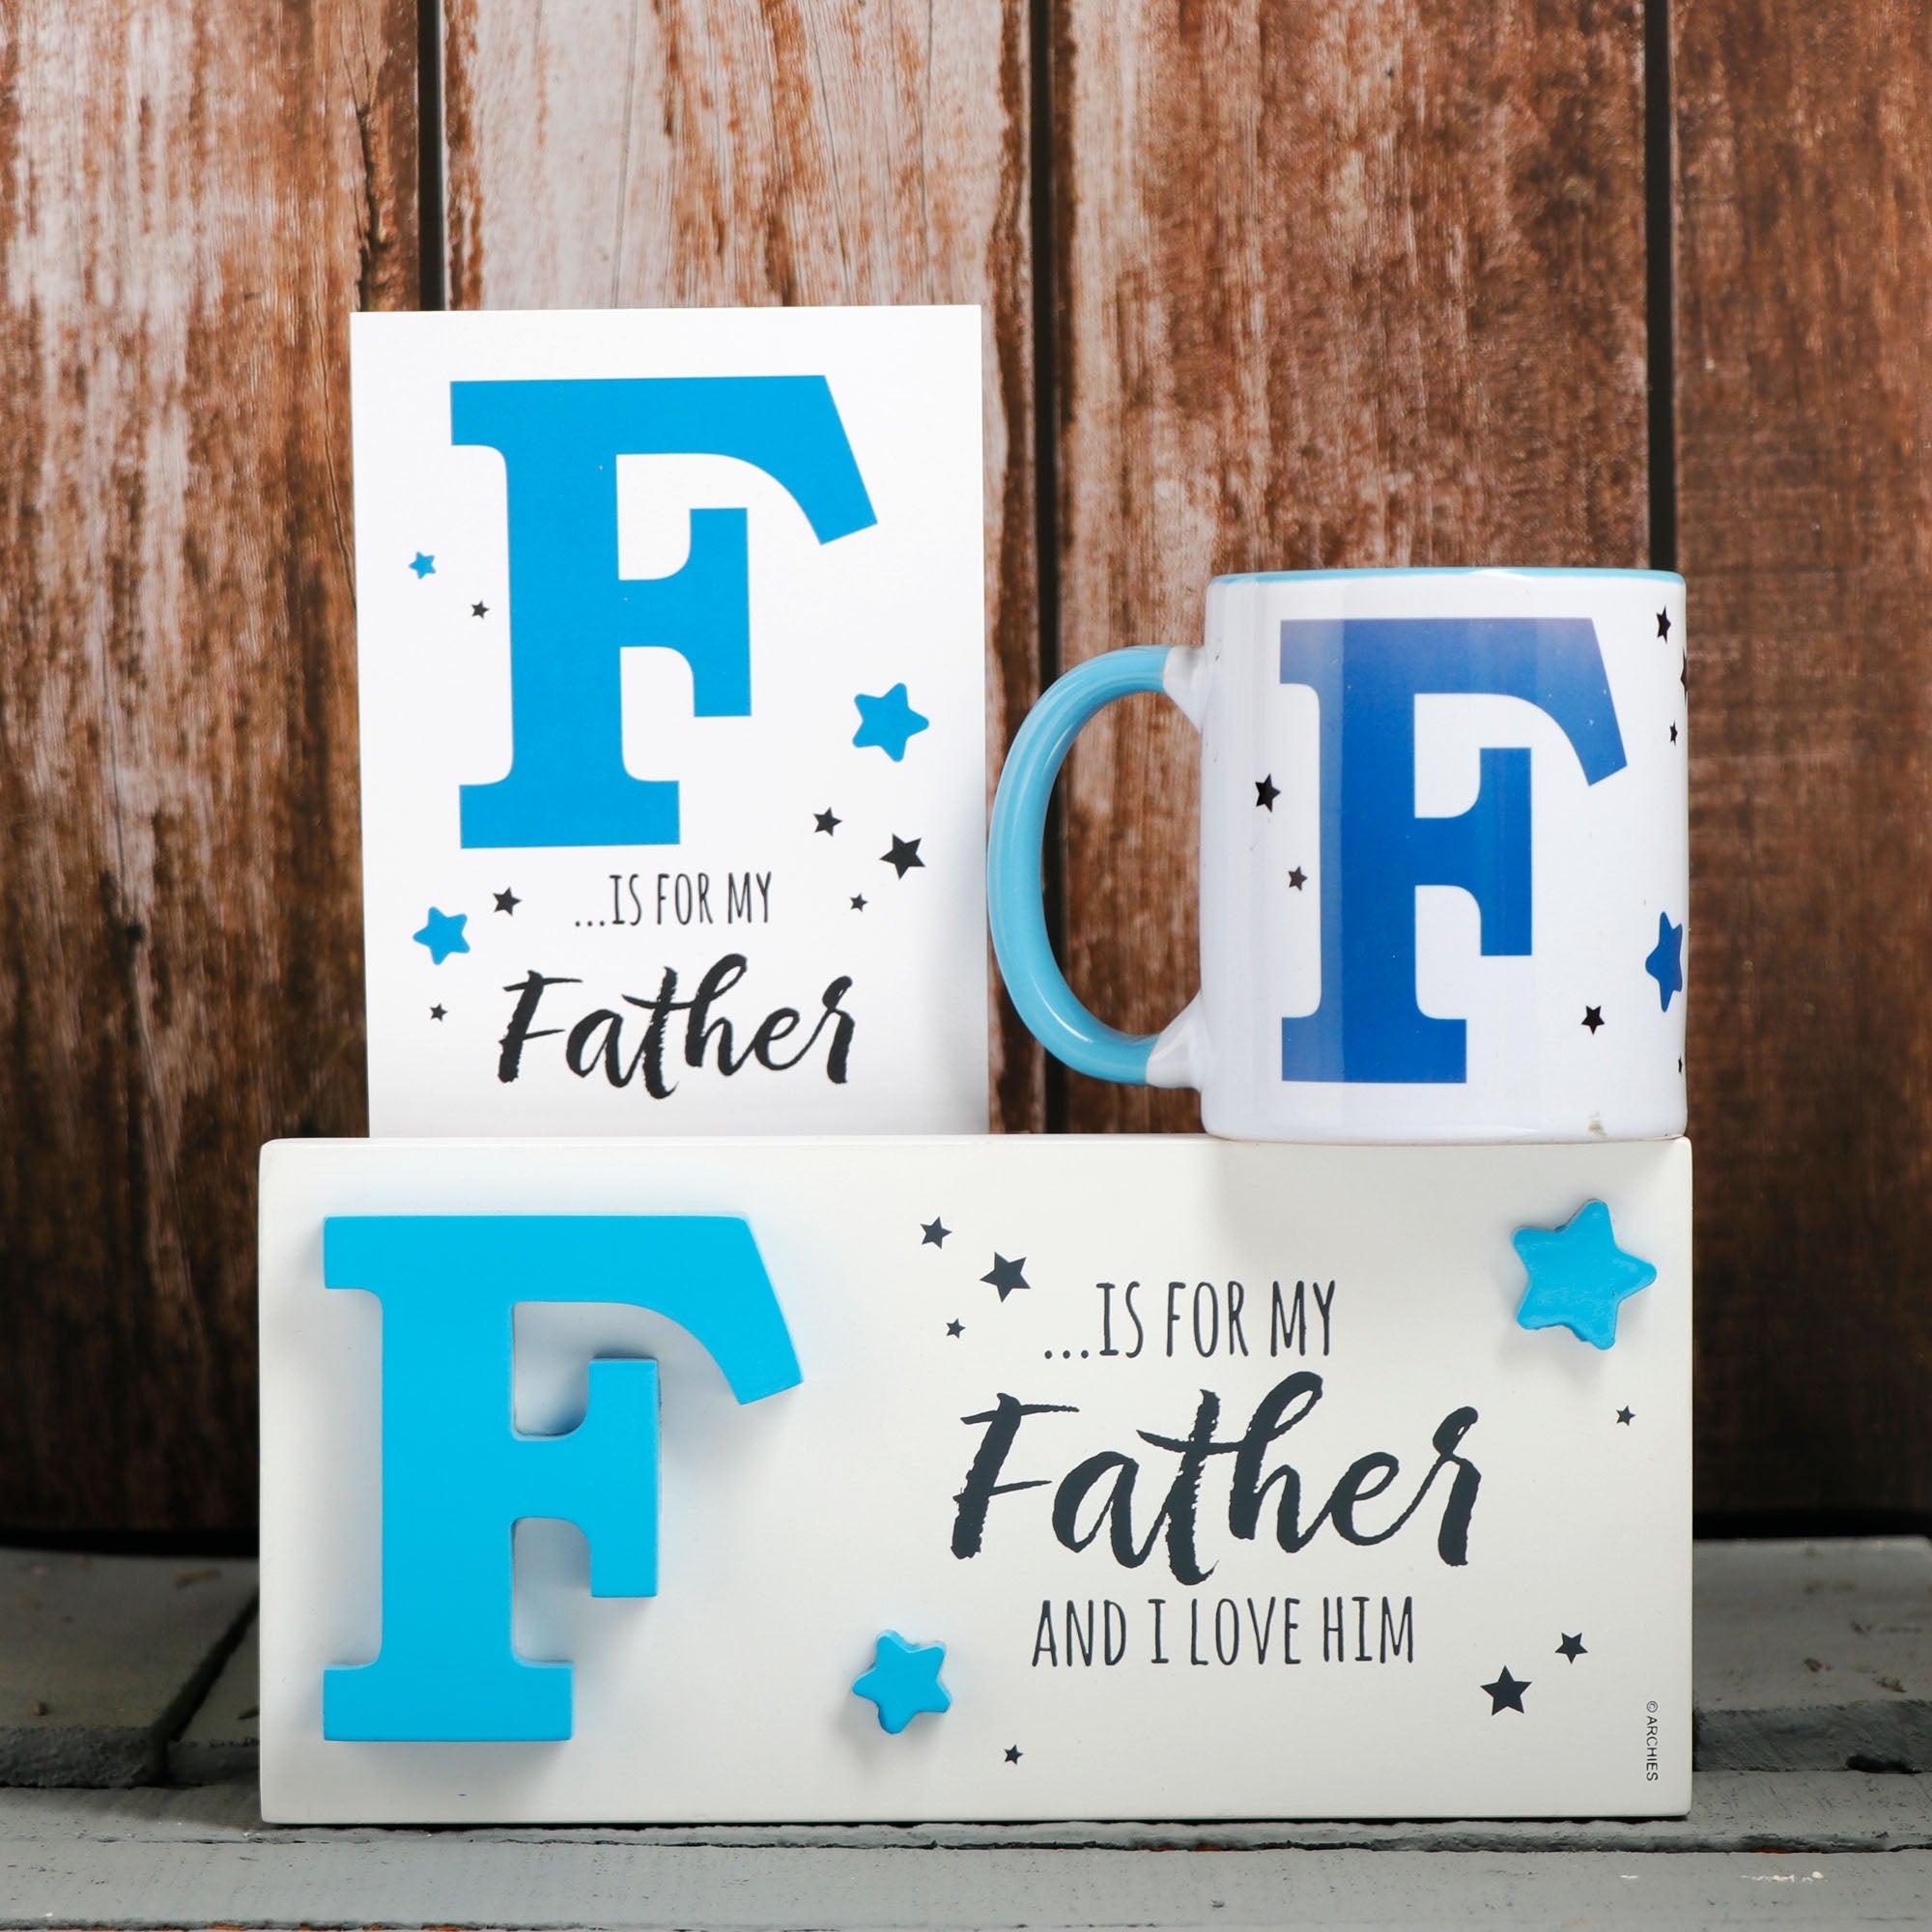 Archies | Archies KEEP SAKE Father's Day Gift Combo with Ceramic Mug and Elevated Initial Quotation - with a FREE GREETING CARD